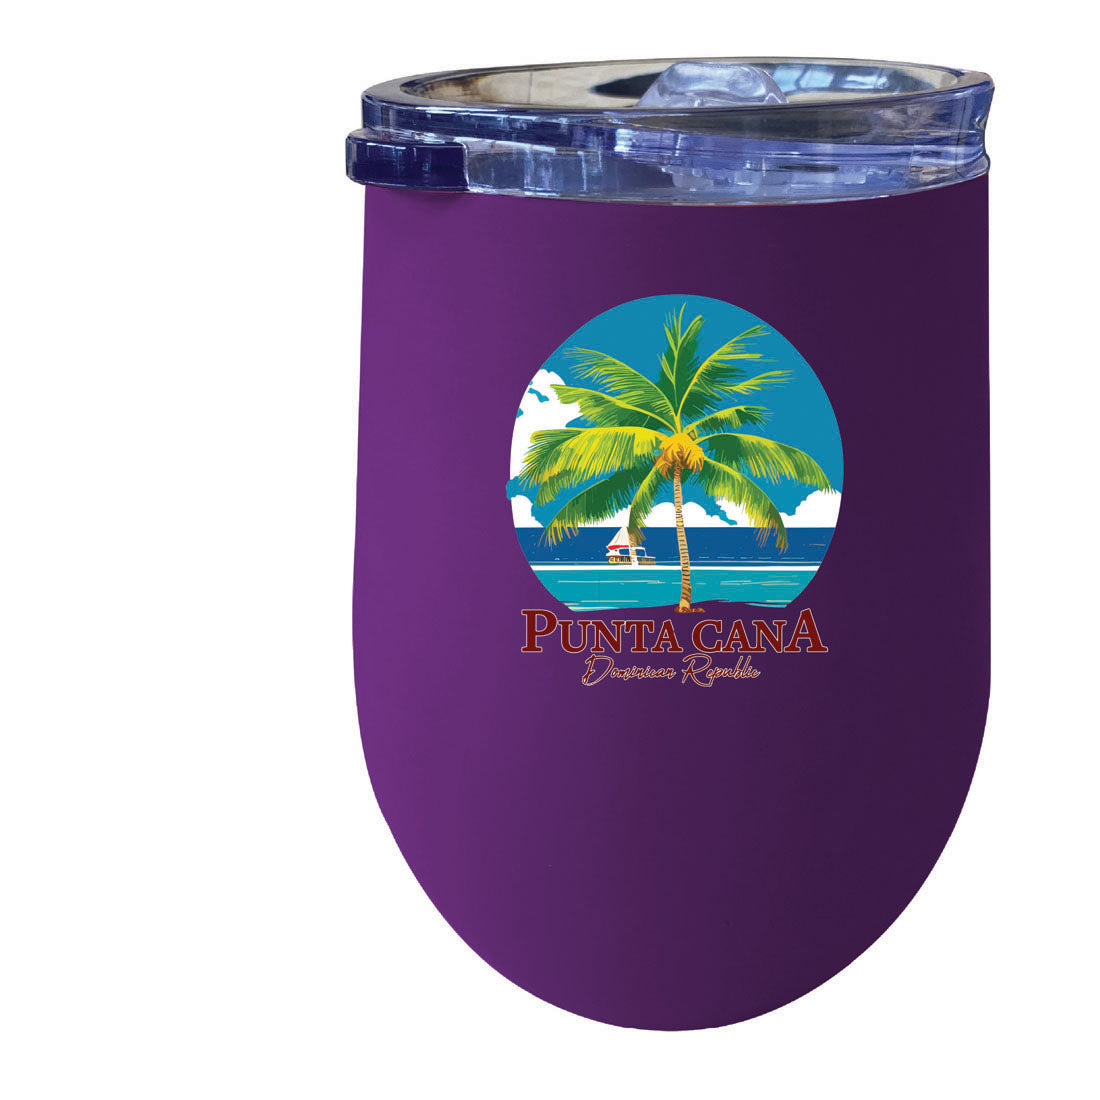 Punta Cana Dominican Republic Souvenir 12 Oz Insulated Wine Stainless Steel Tumbler - Black, PARROT